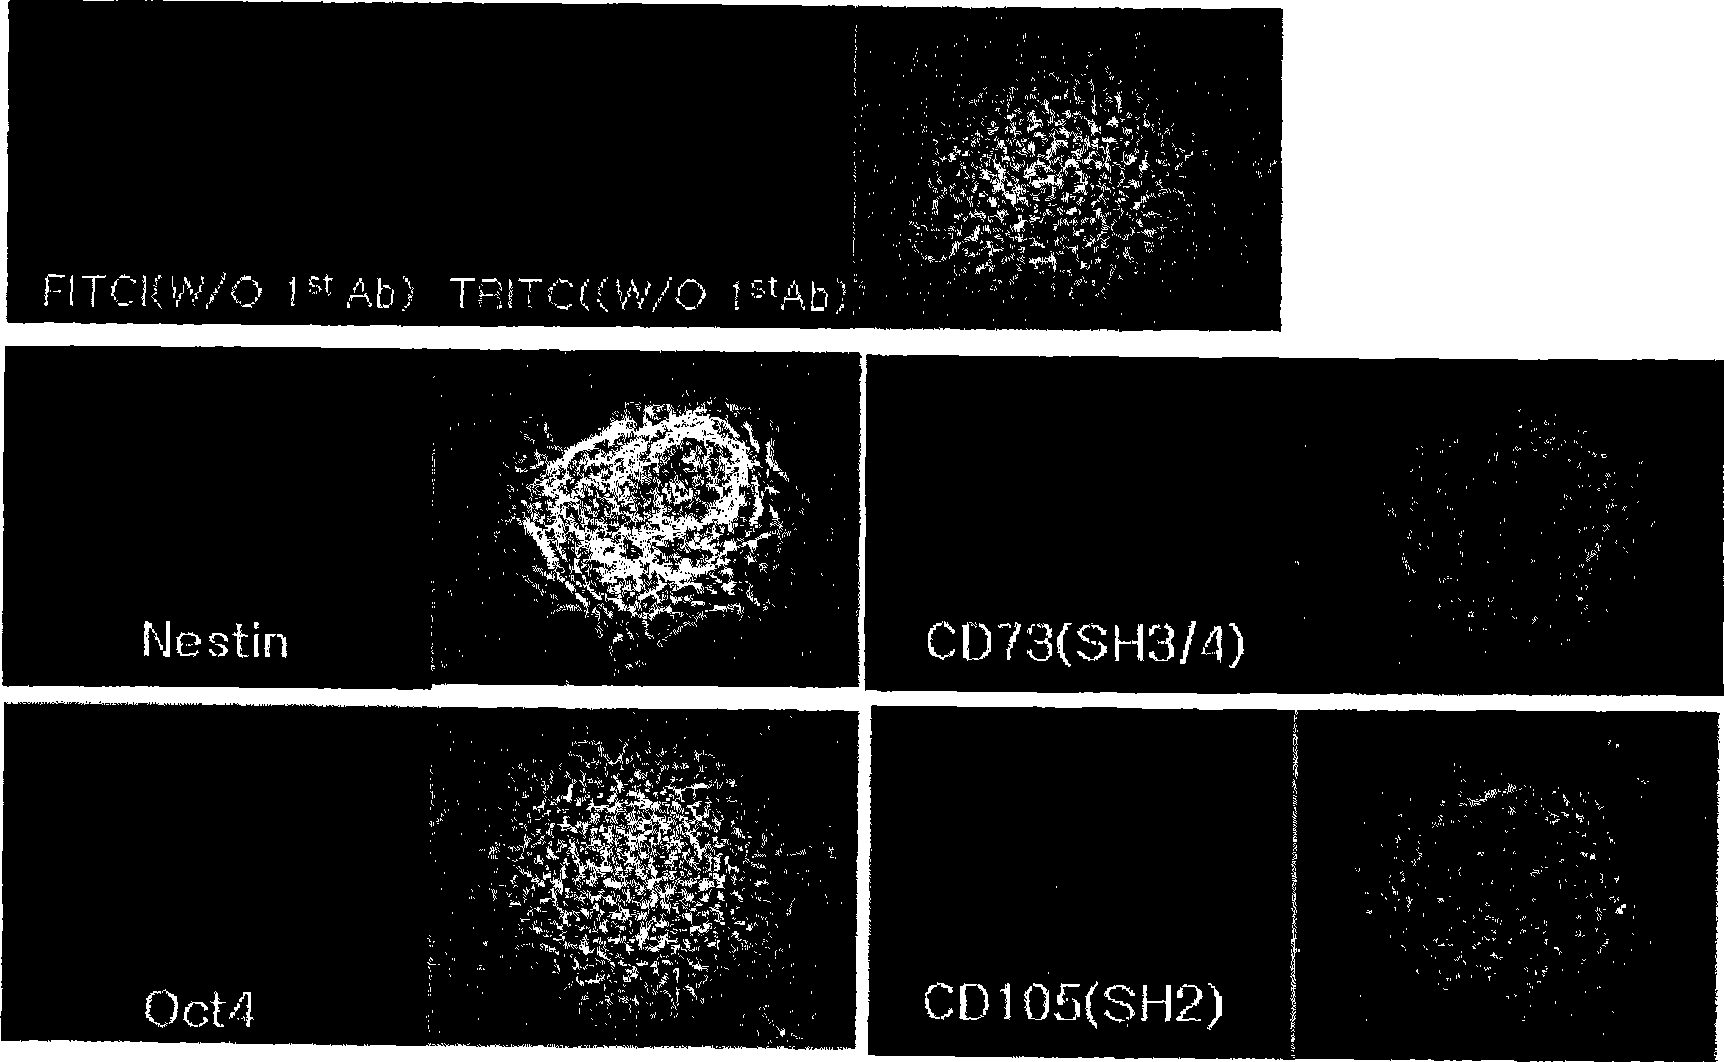 Cosmetic or plastic composition comprising multipotent stem cells derived from human adipose tissue, fibroblast, and adipose or adiopocyte